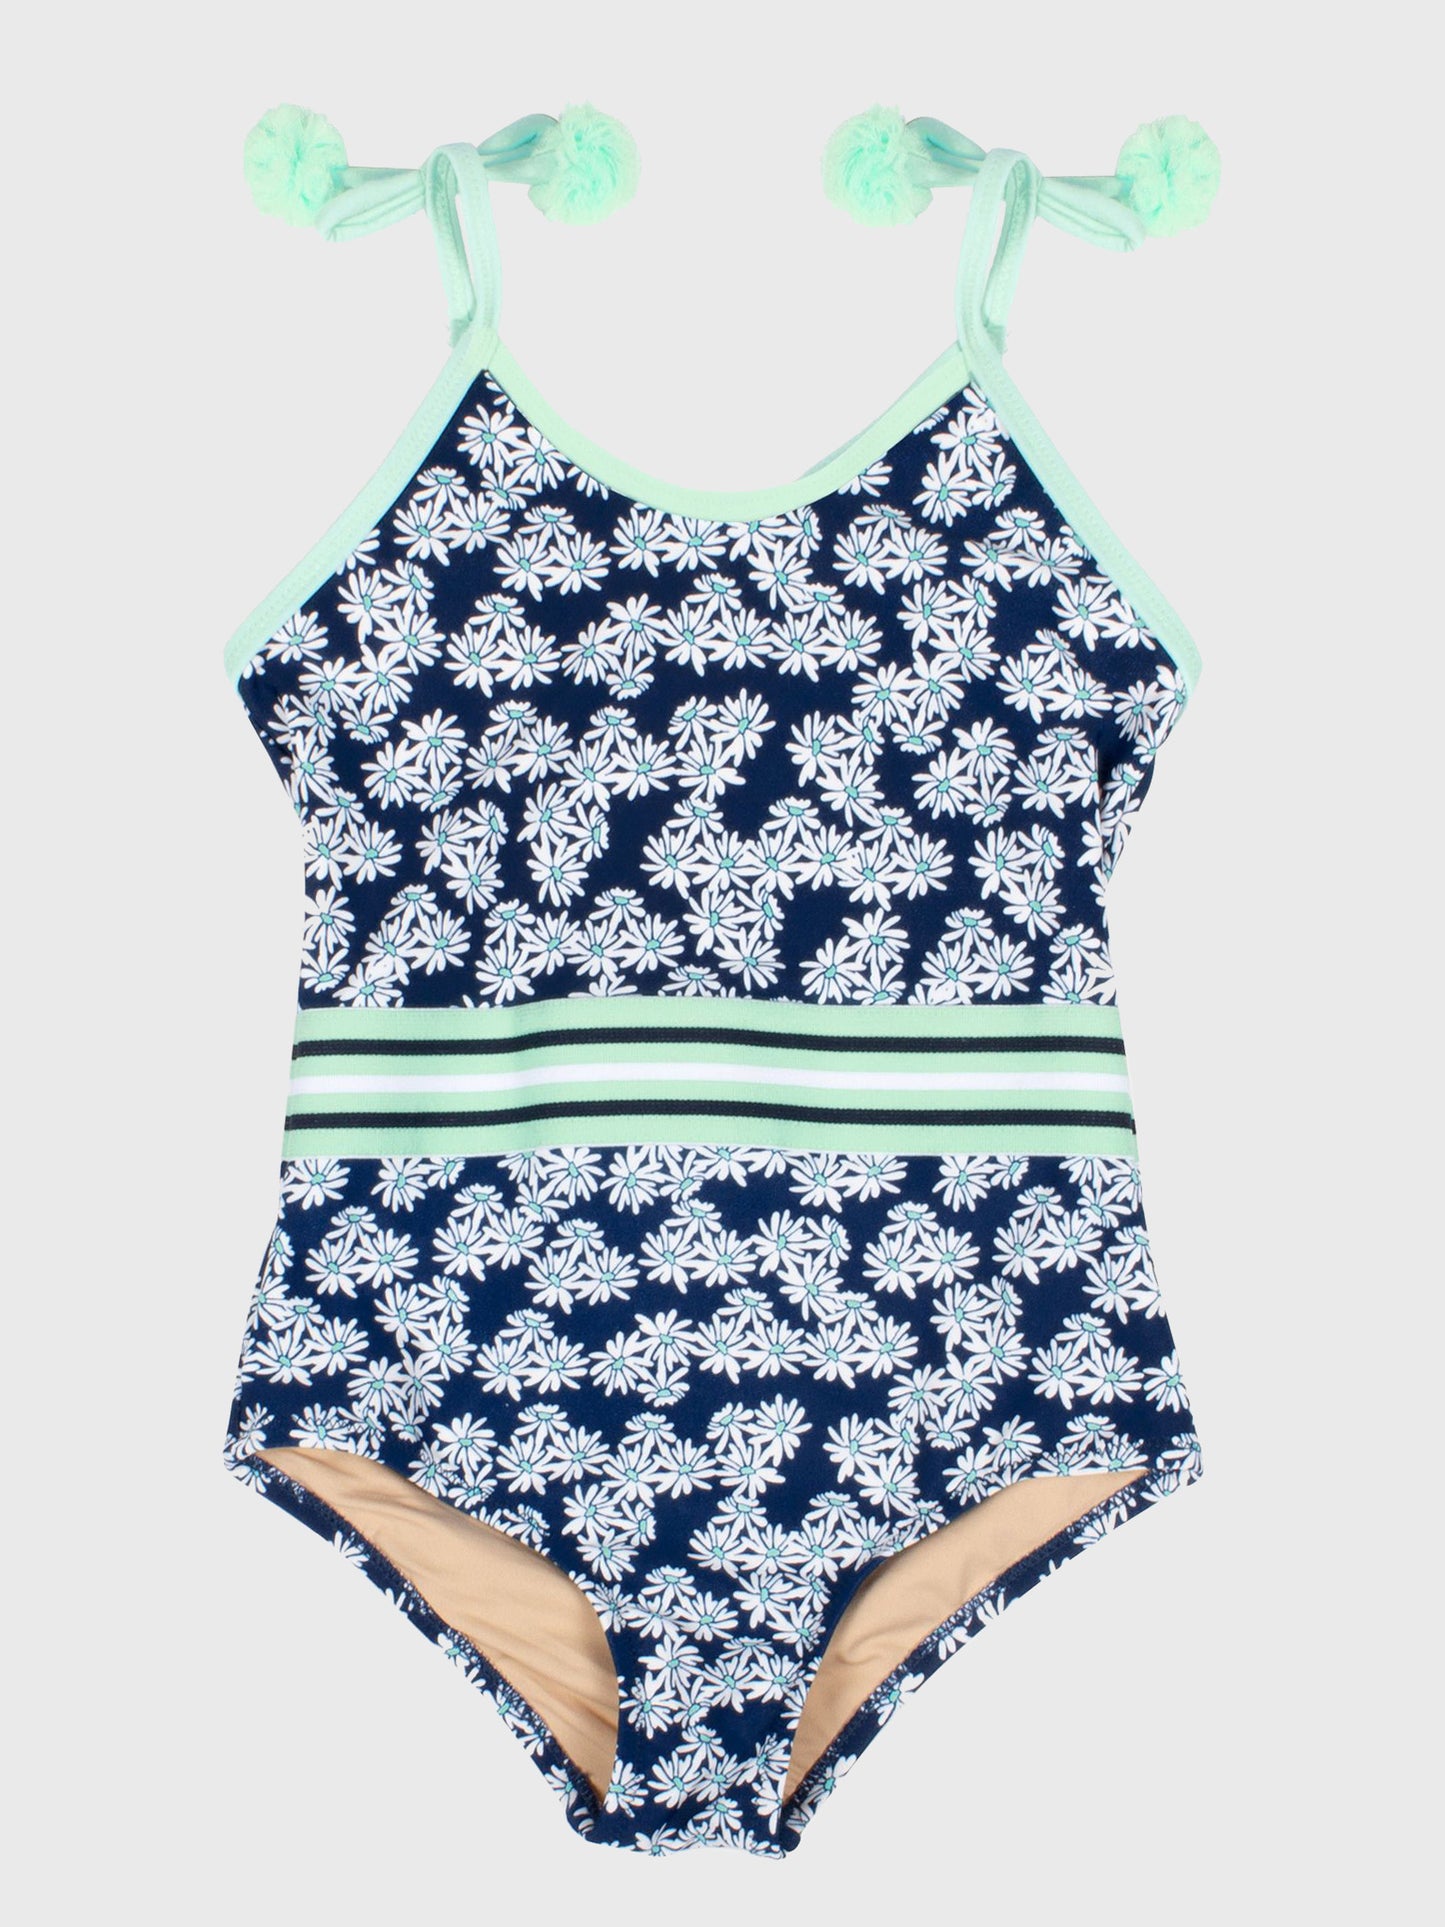 Shade Critters Little Girls' Pom Pom Strap One-Piece Swimsuit